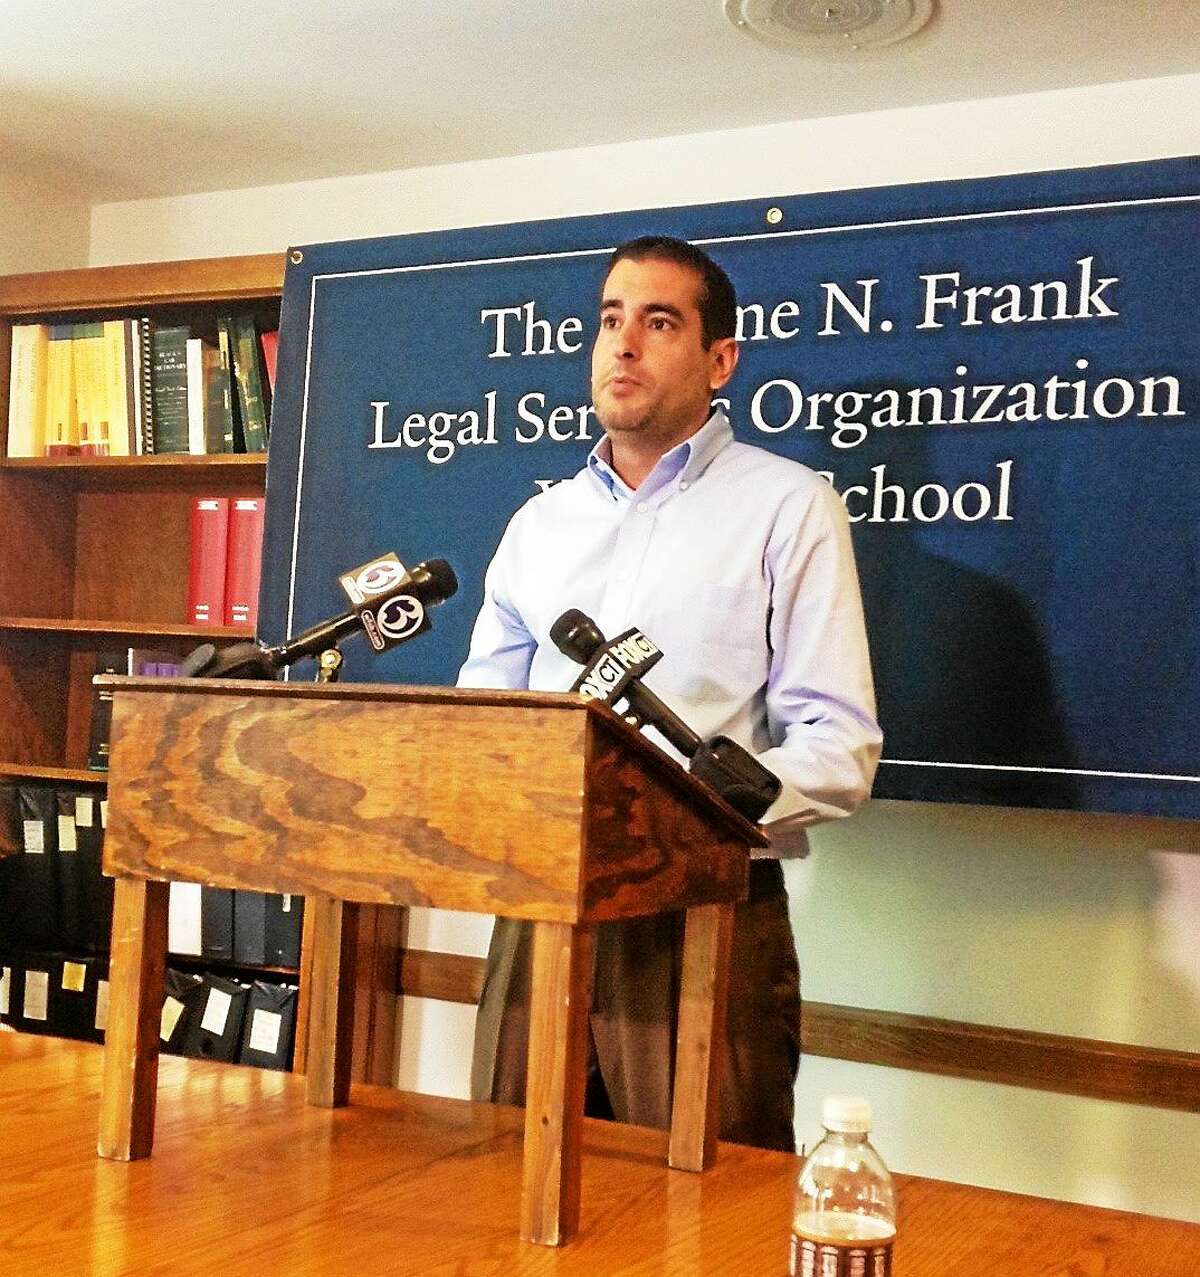 (Mary O'Leary - New haven Register) Salvador Milardo, son of Paolina Milardo, becomes emotional as he talks about his mother's deportation at a press conference at the Yale Law School in New Haven.